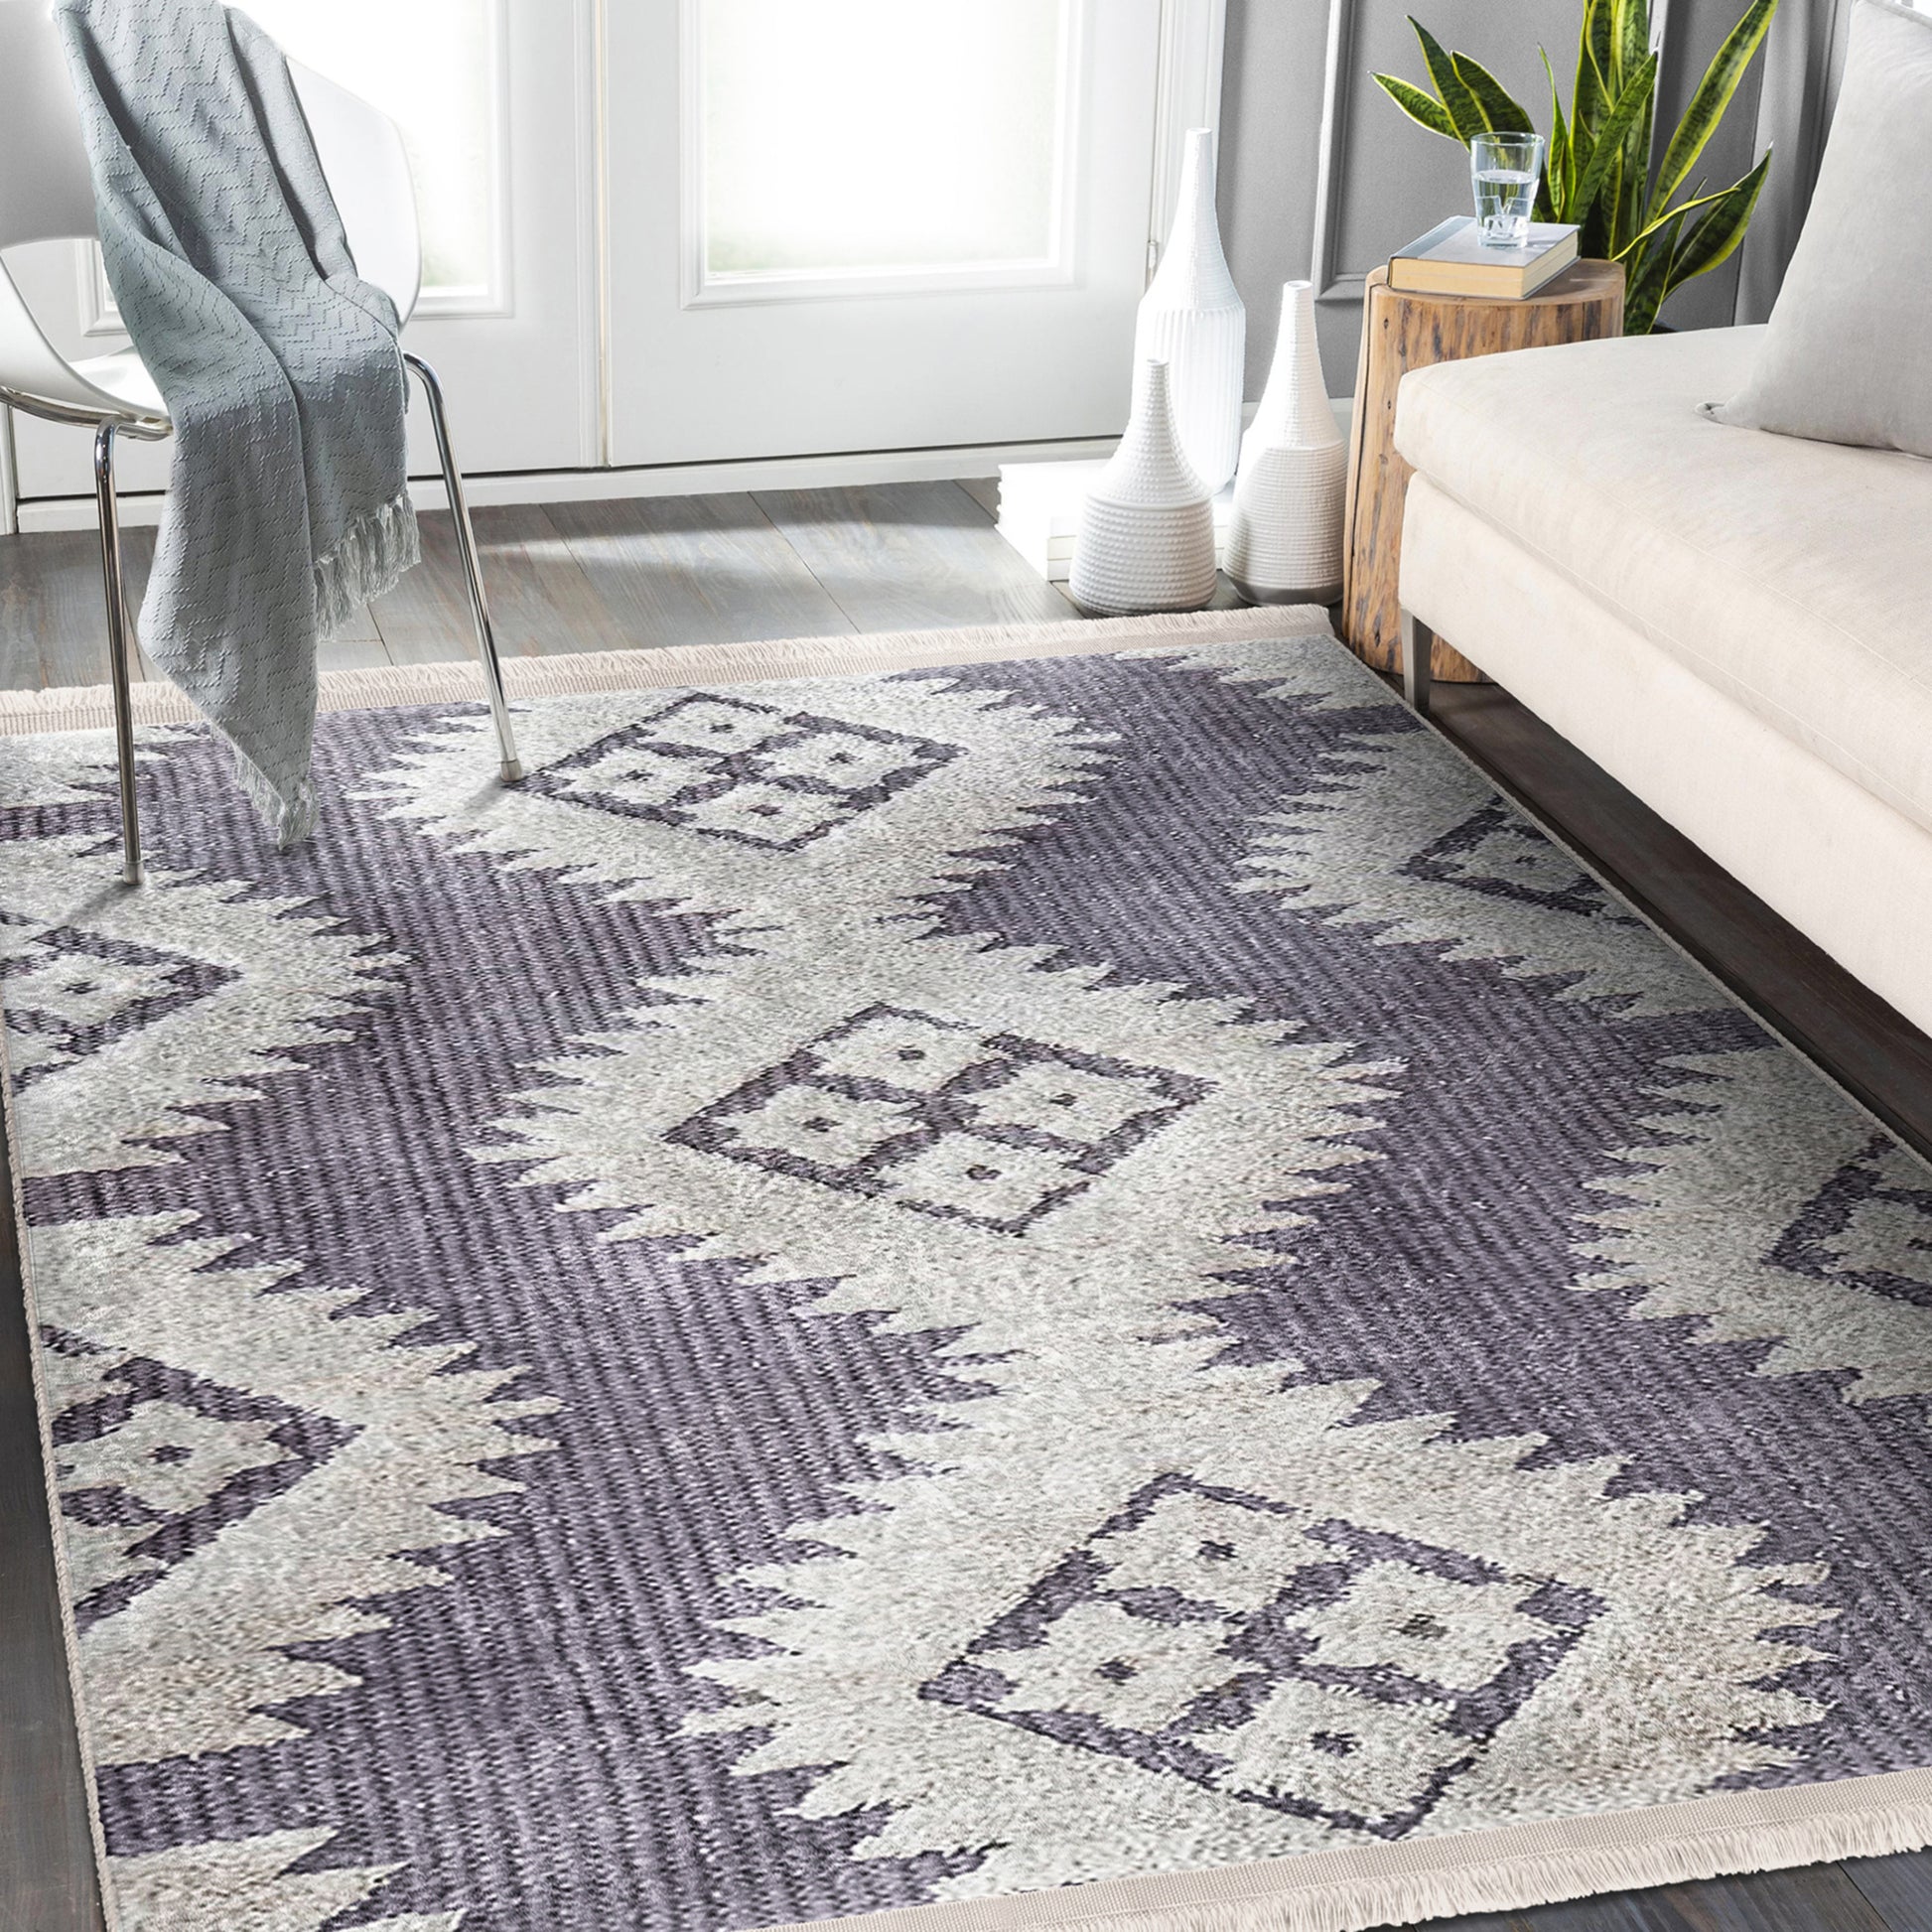 Elegantly Cozy Washable Rug for Your Home